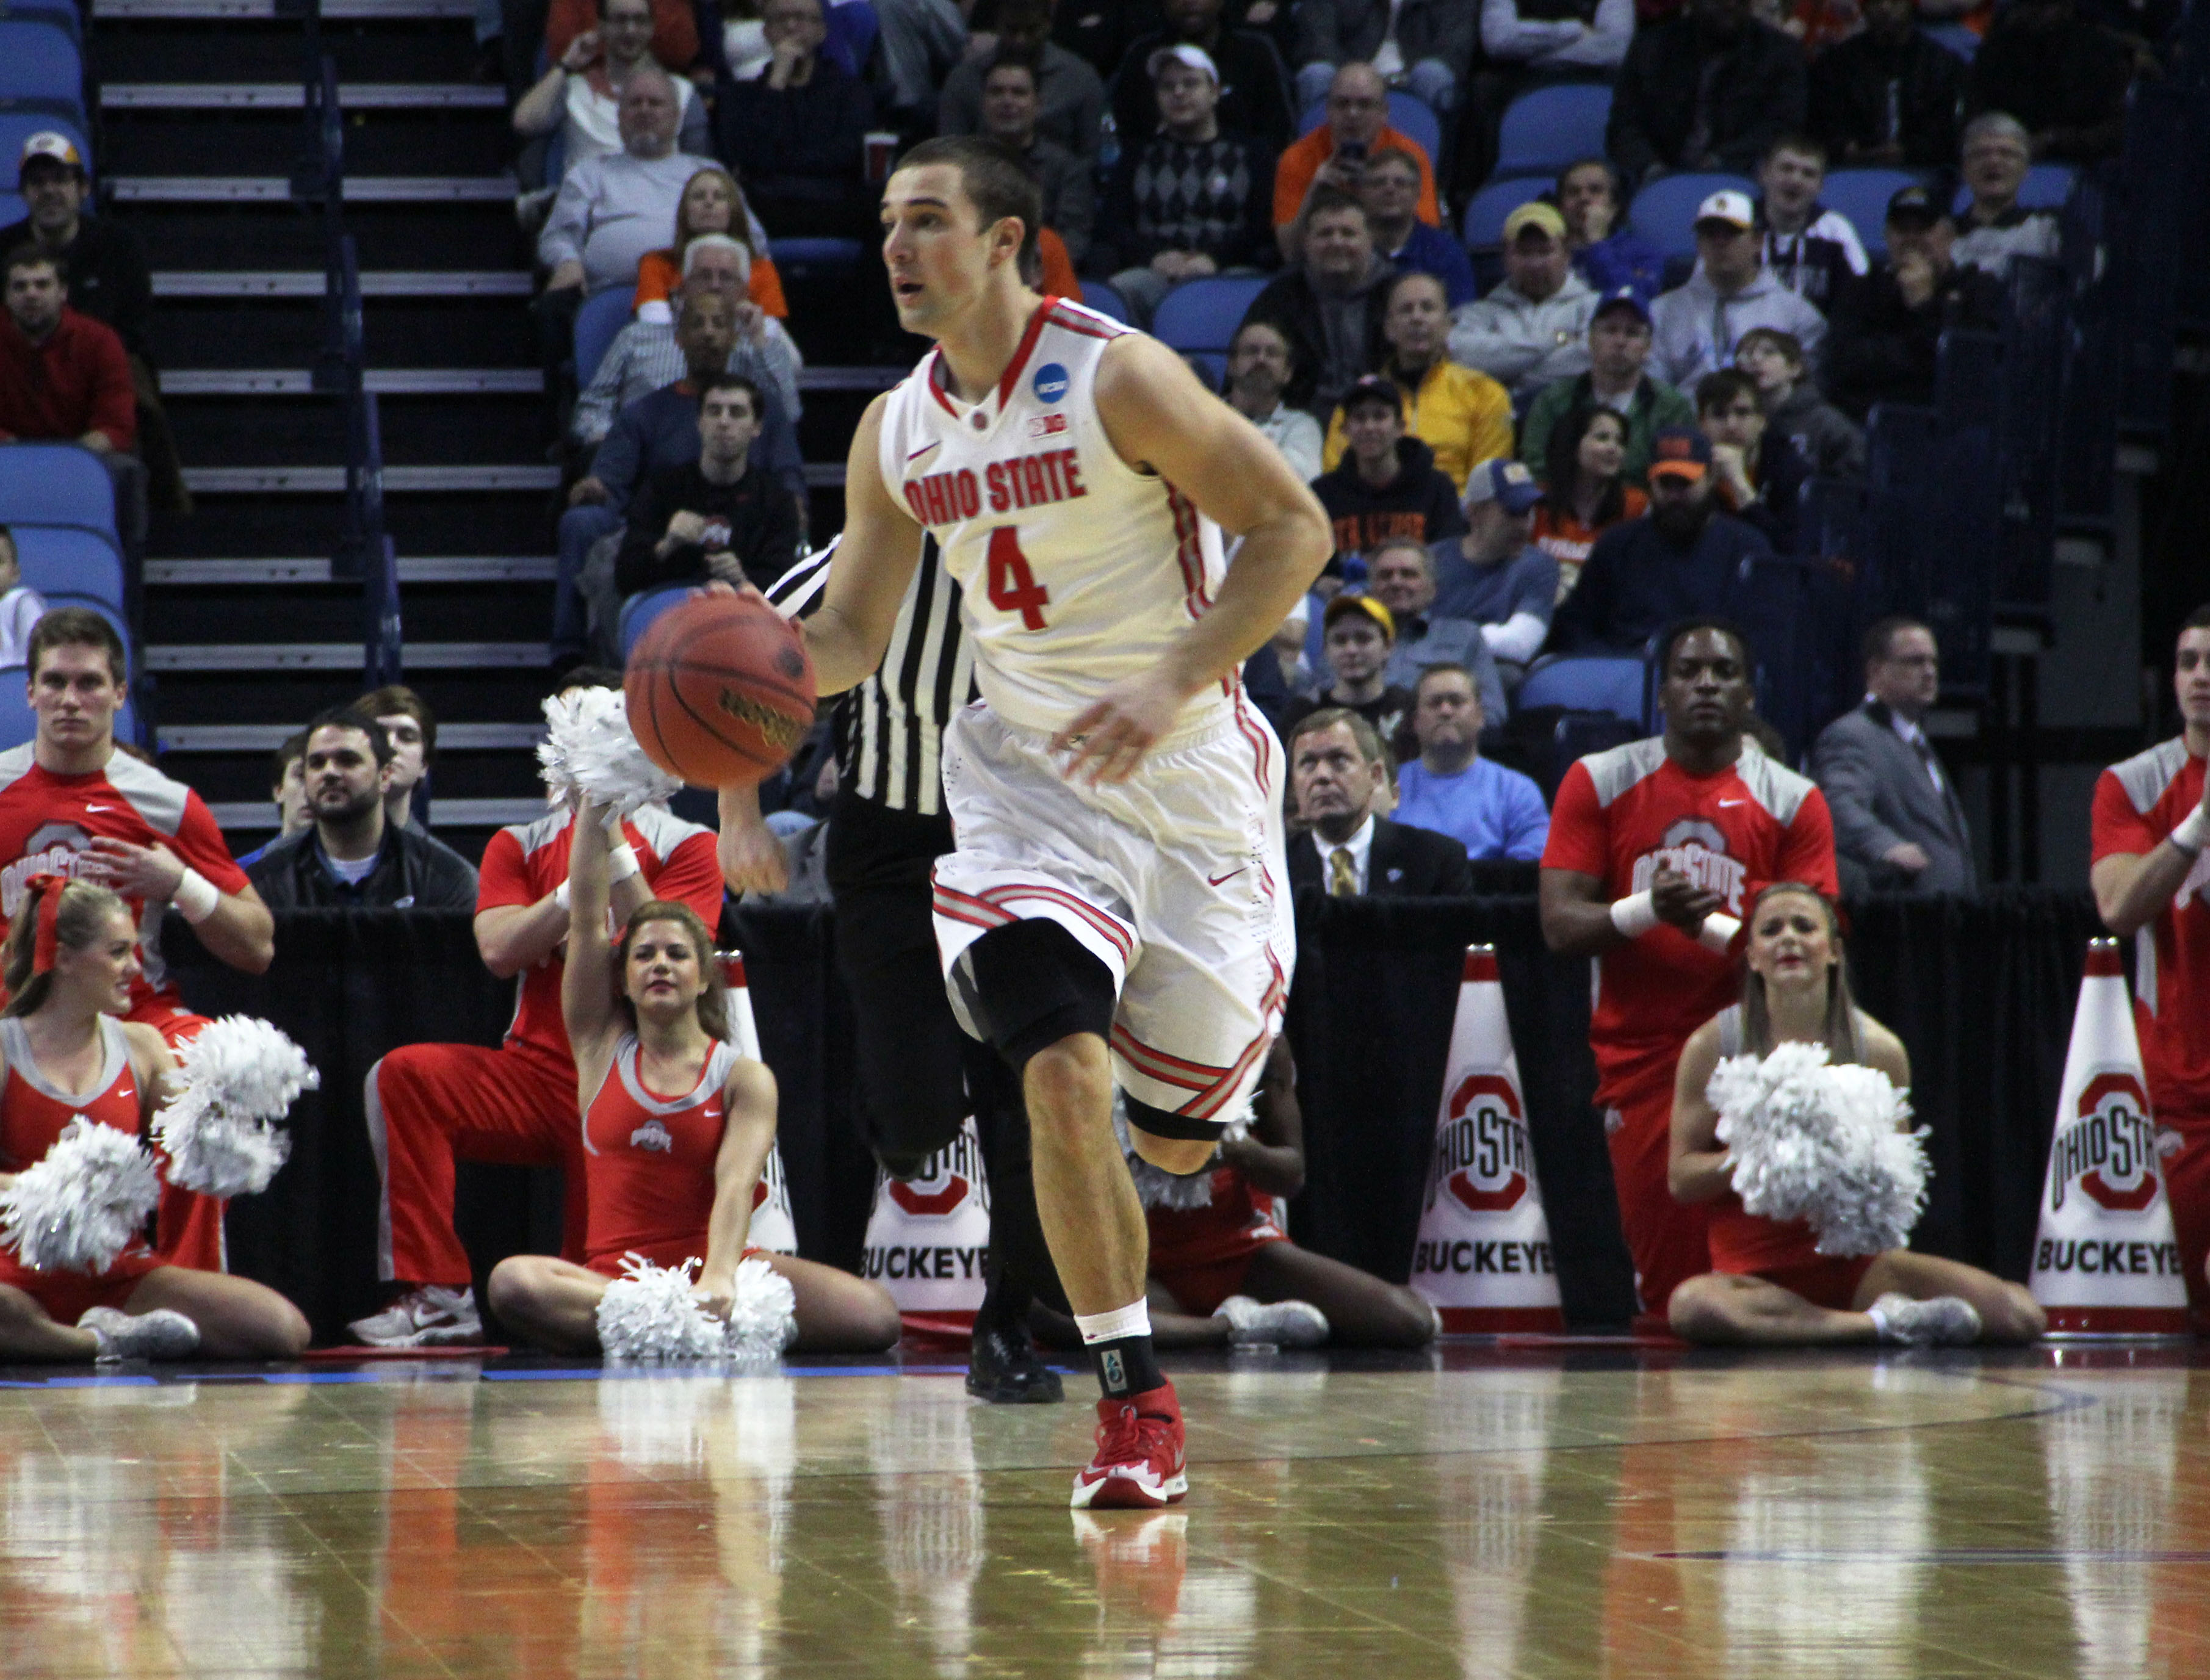 Senior guard Aaron Craft (4) caries the ball down the court in a game against Dayton. OSU lost, 60-59, at First Niagara Center March 20.